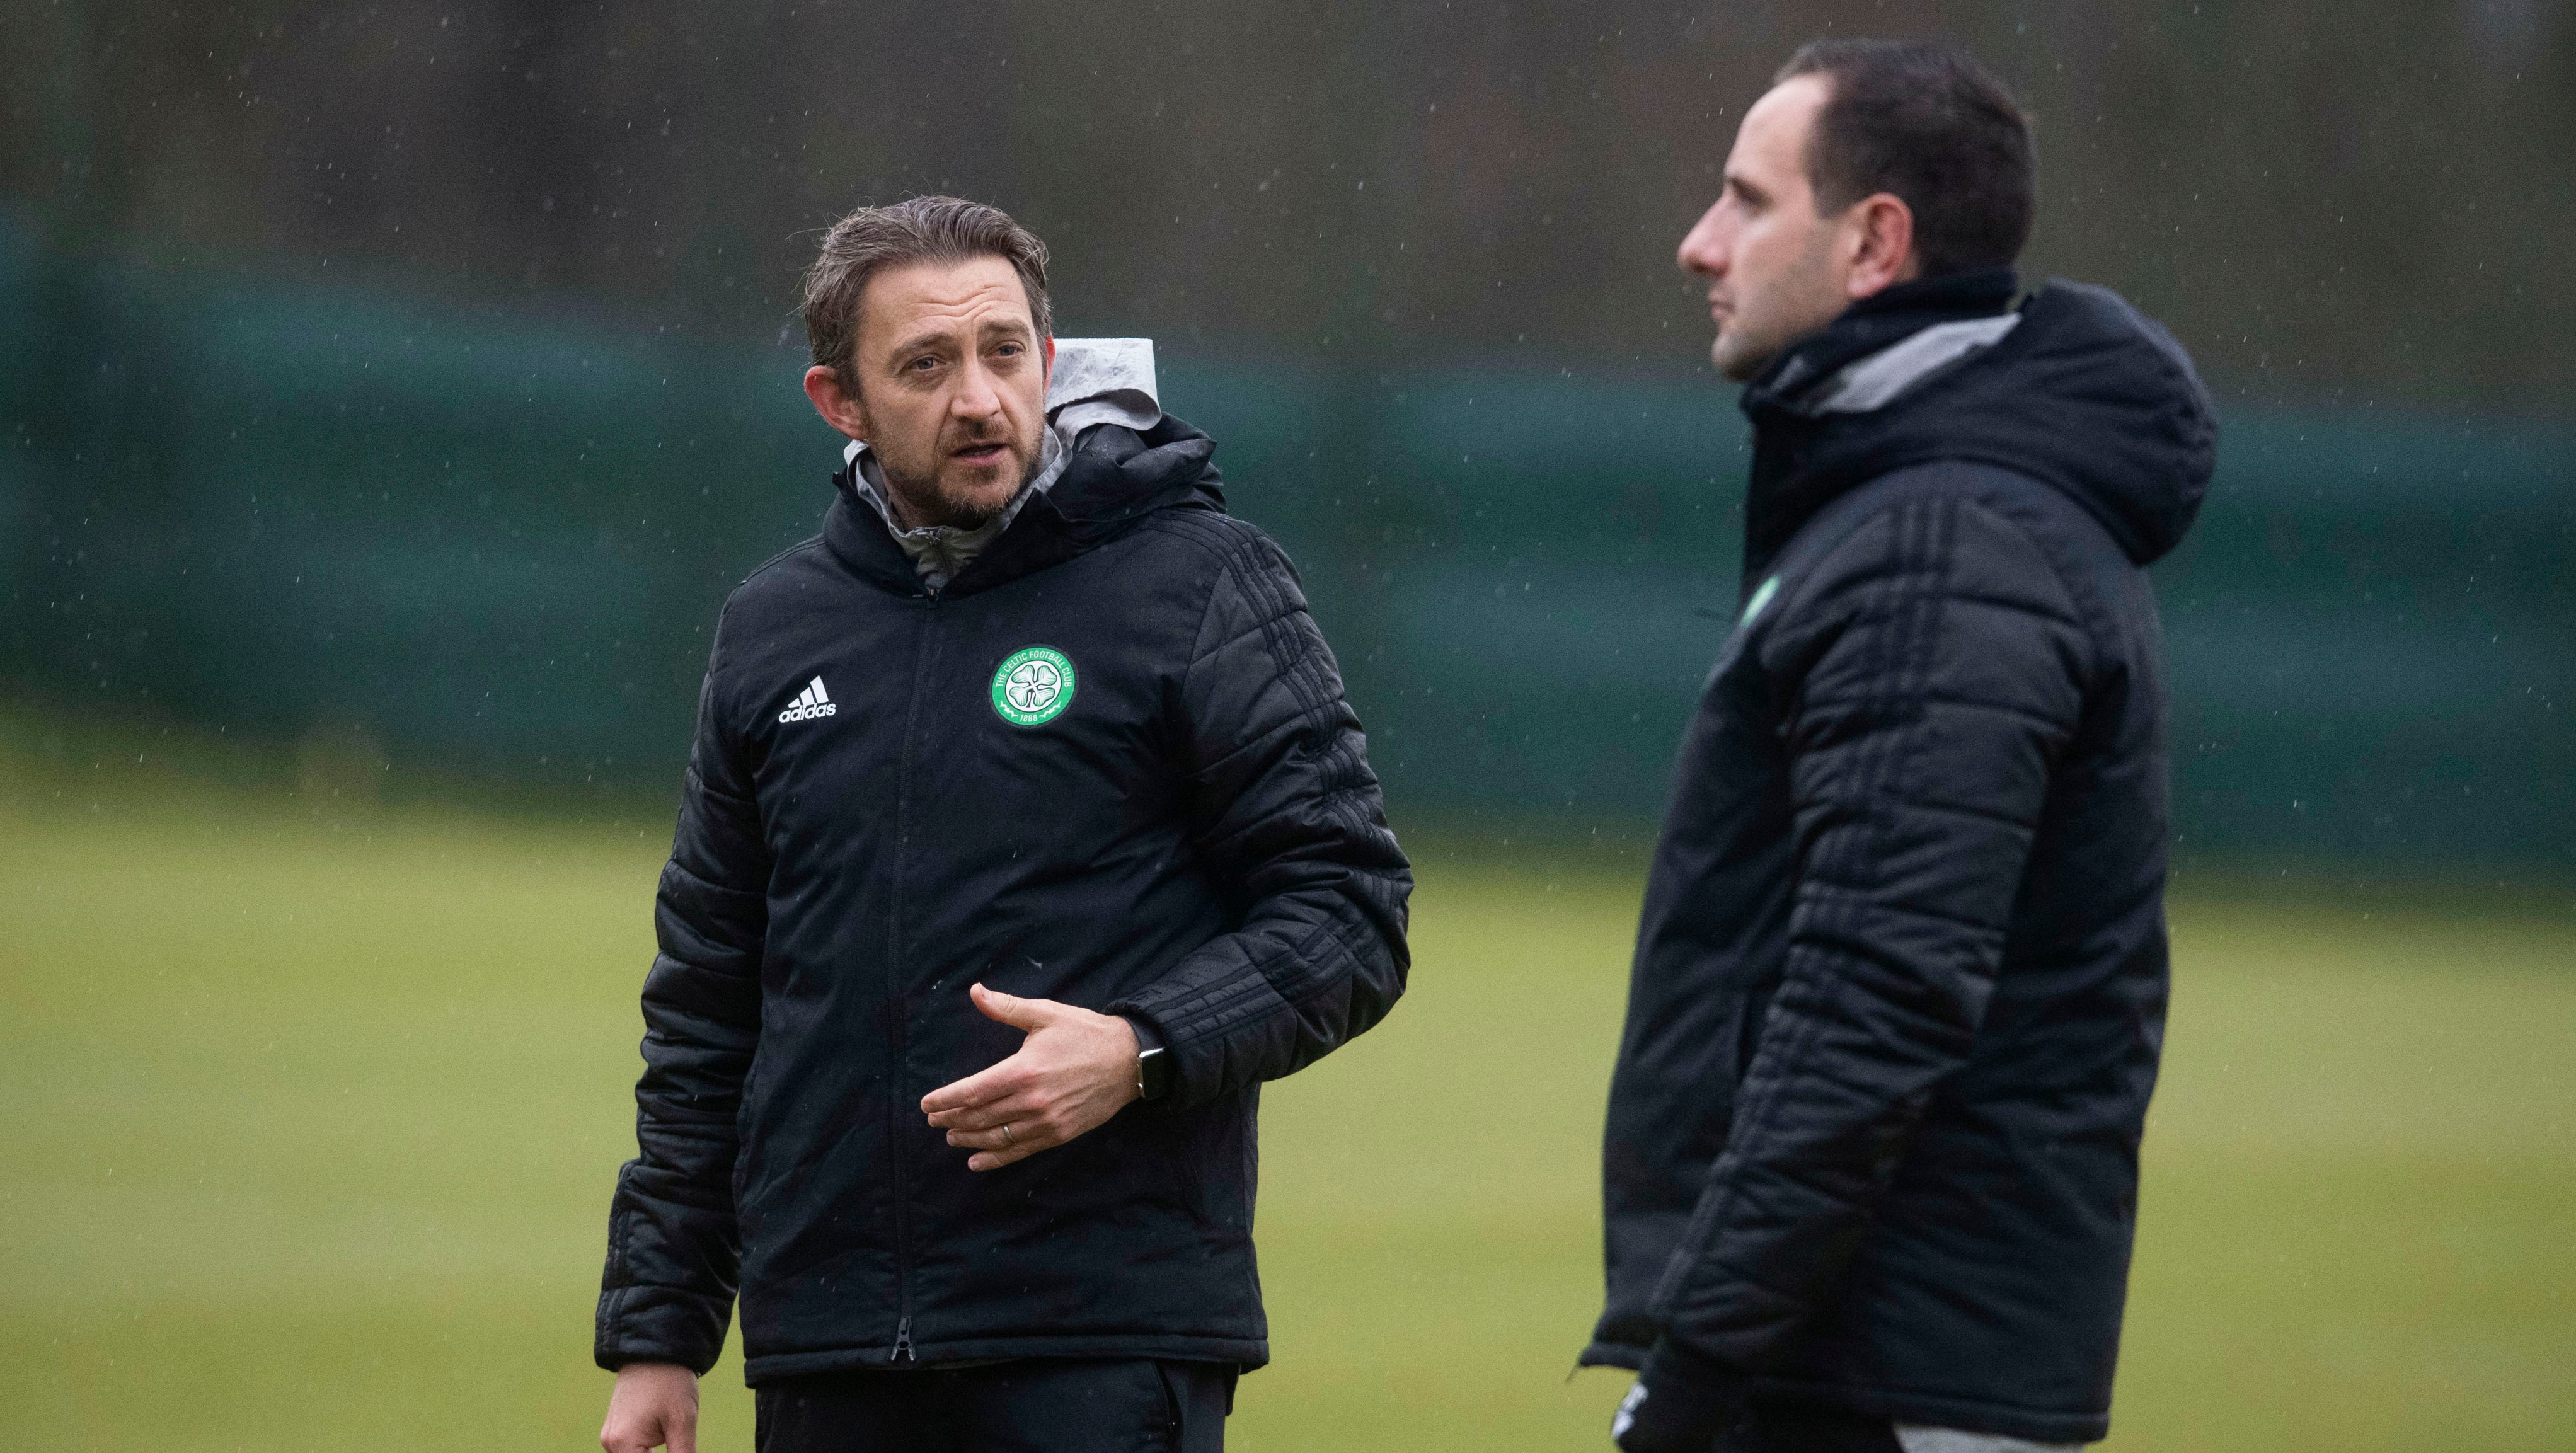 Celtic coach Gavin Strachan and assistant manager John Kennedy (right) during a Celtic training session at Lennoxtown. (Photo by Craig Foy / SNS Group)